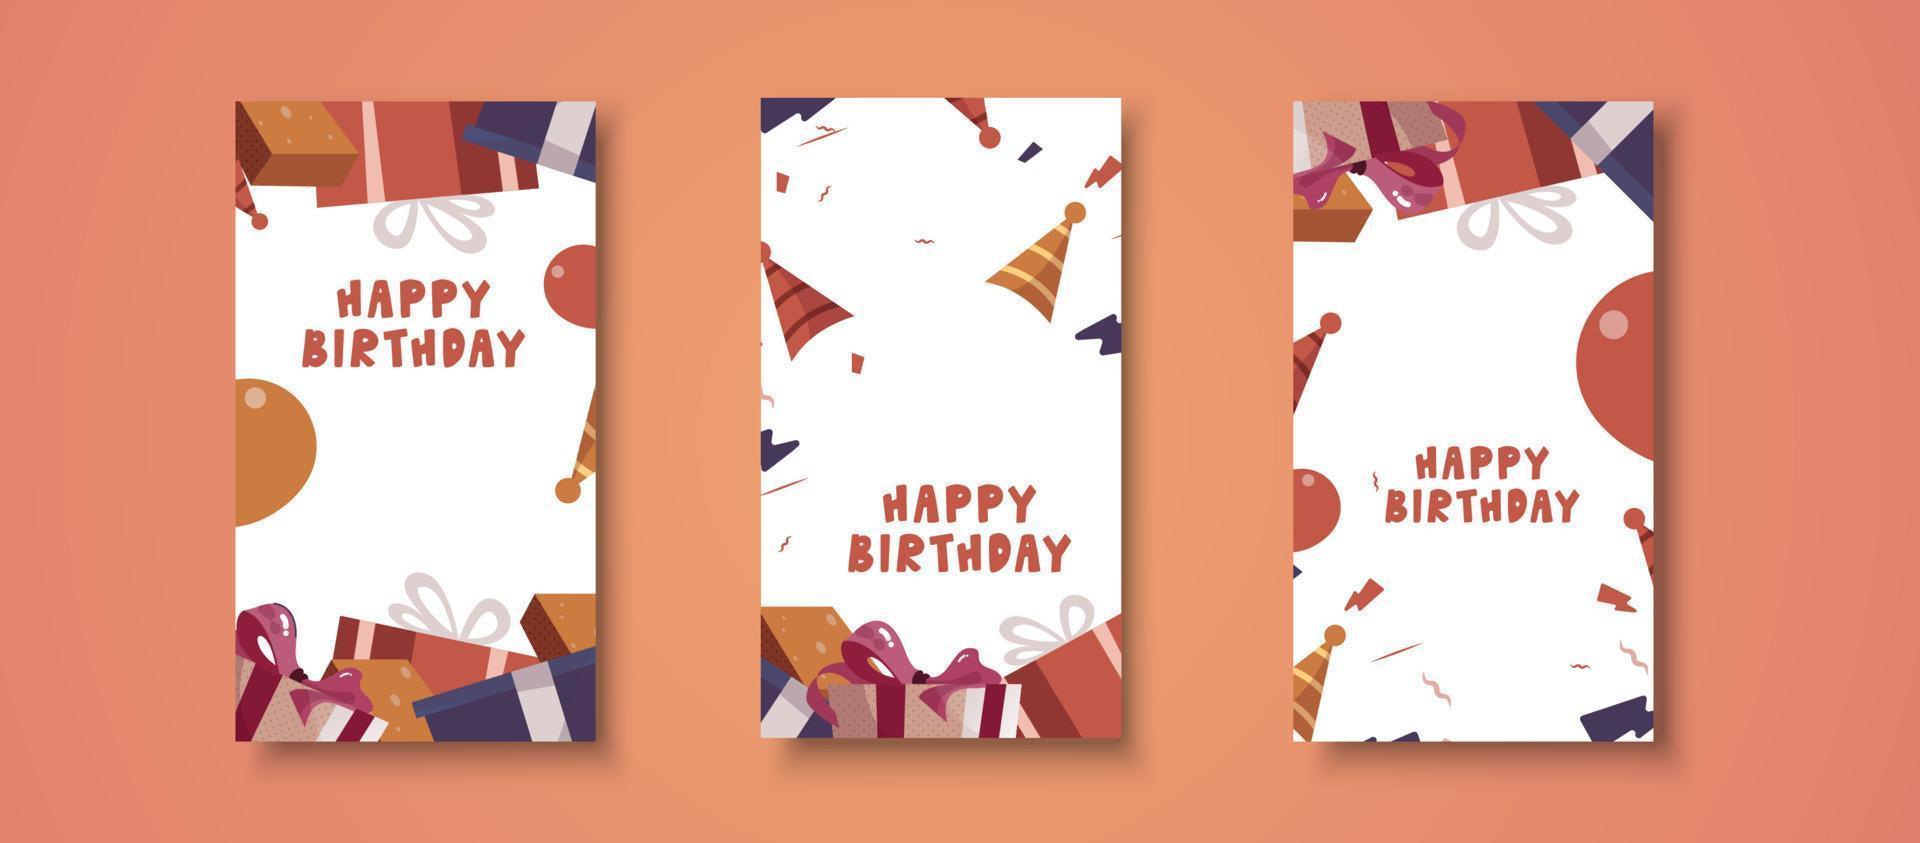 Creative Story Package Happy birthday. Social Media Templates soft color vector